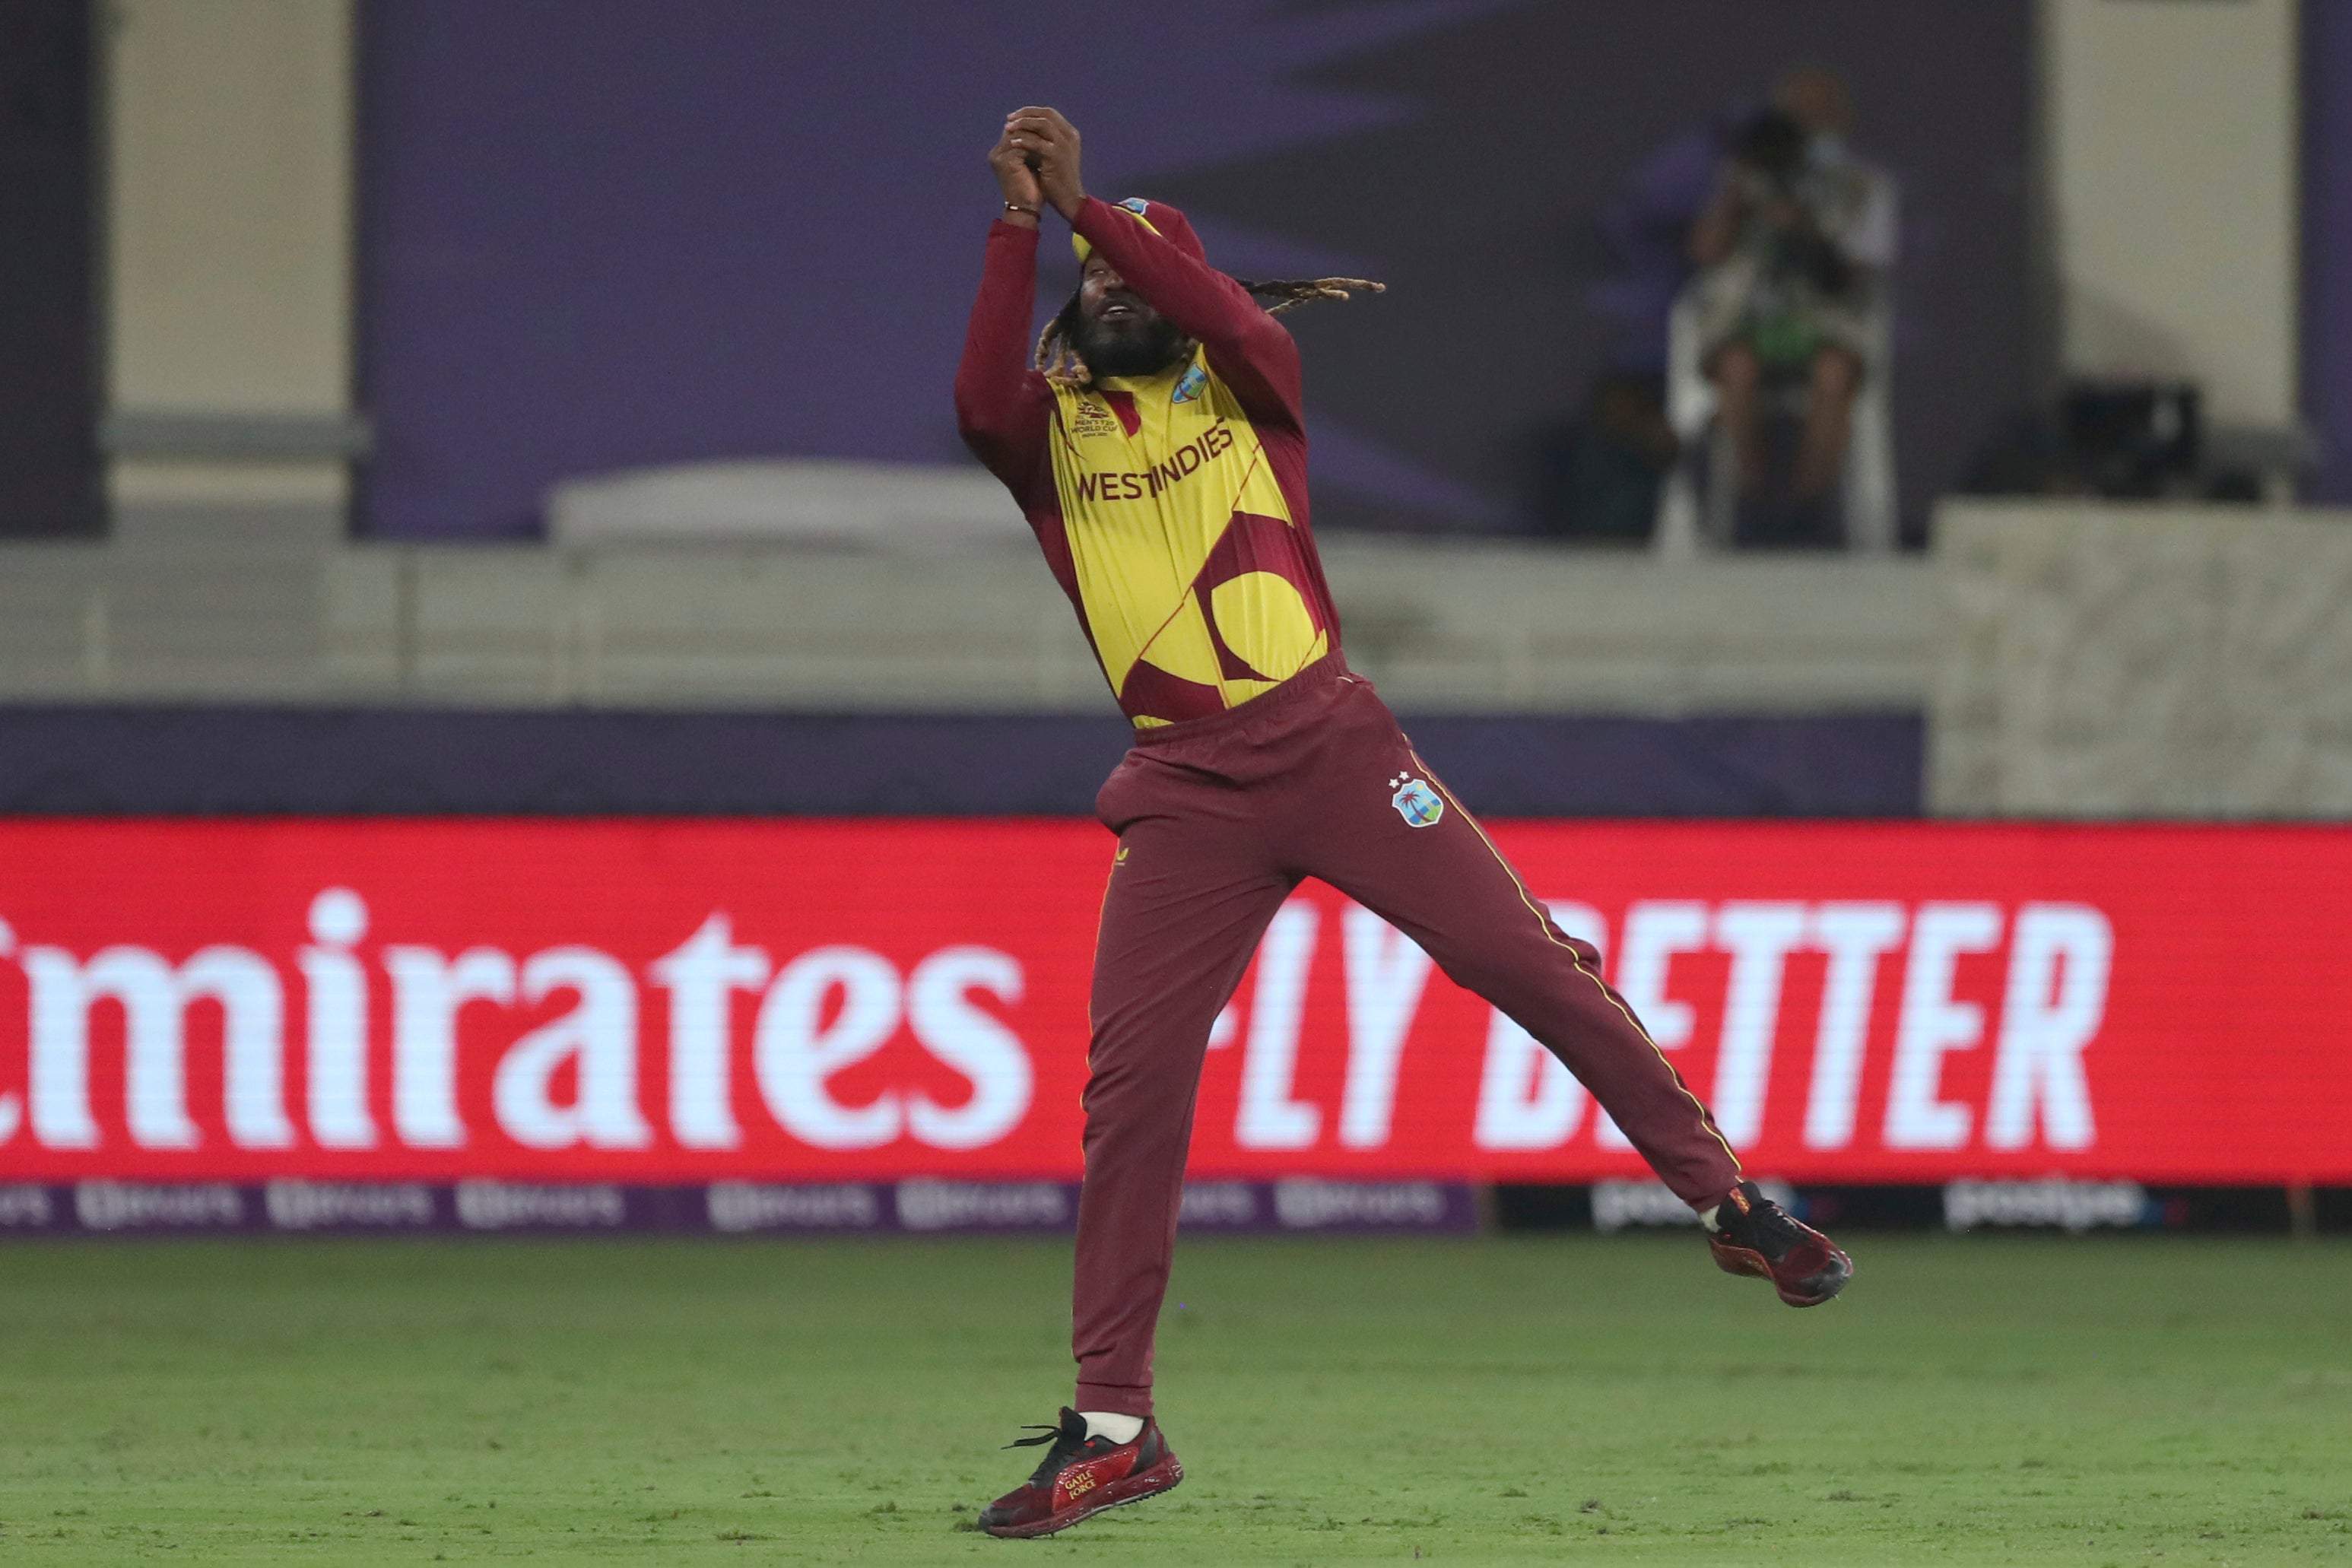 West Indies’ Chris Gayle takes a catch to dismiss England’s Jason Roy in their T20 World Cup match in Dubai (Aijaz Rahi/PA)